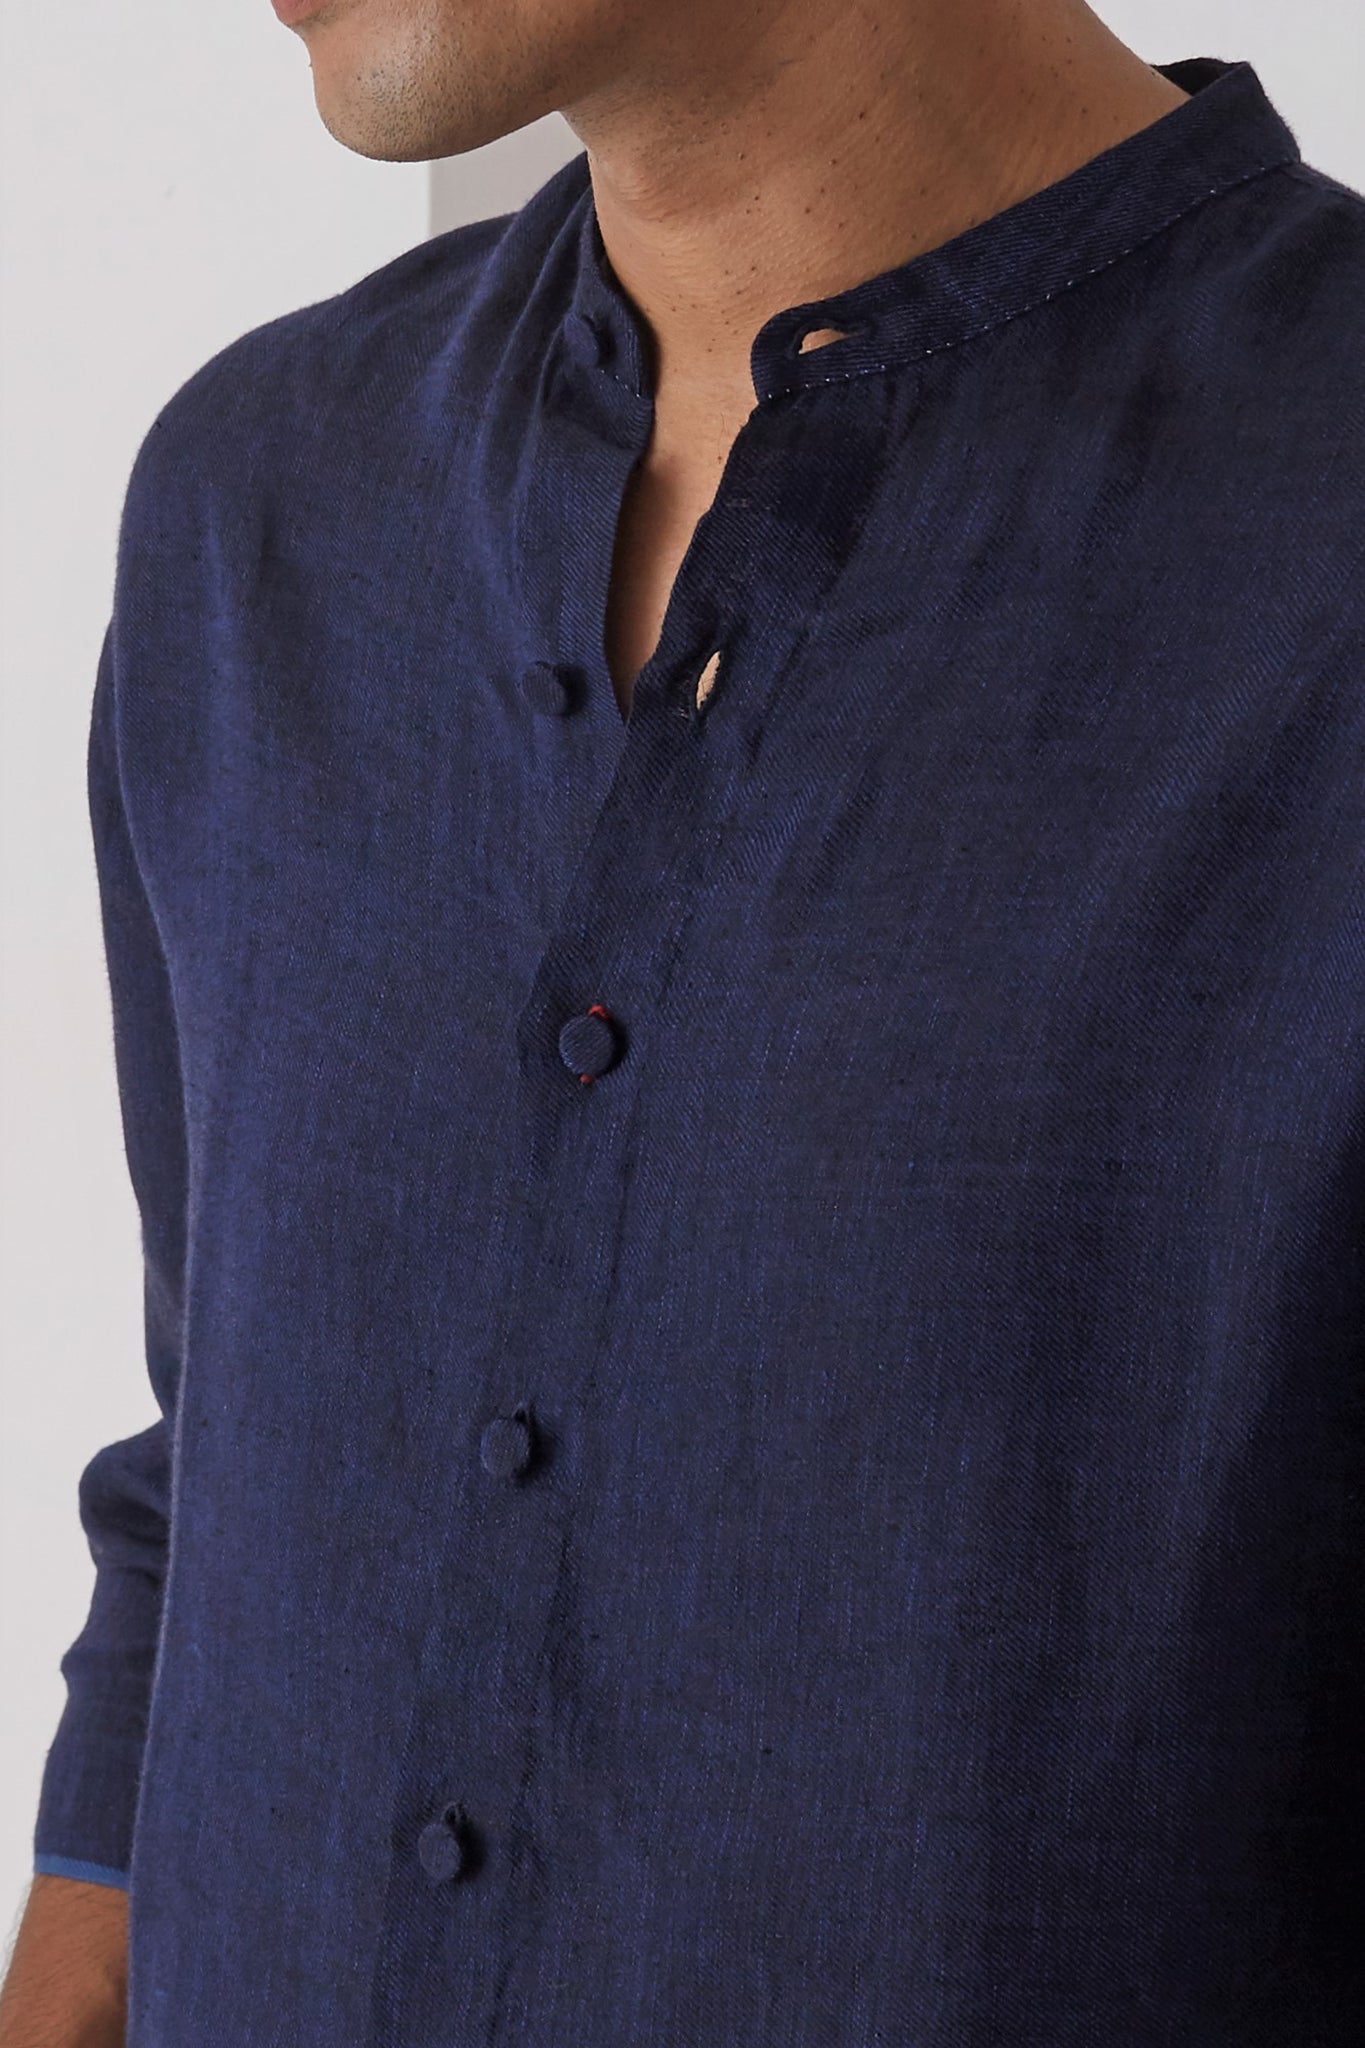 Navy button down marve shirt